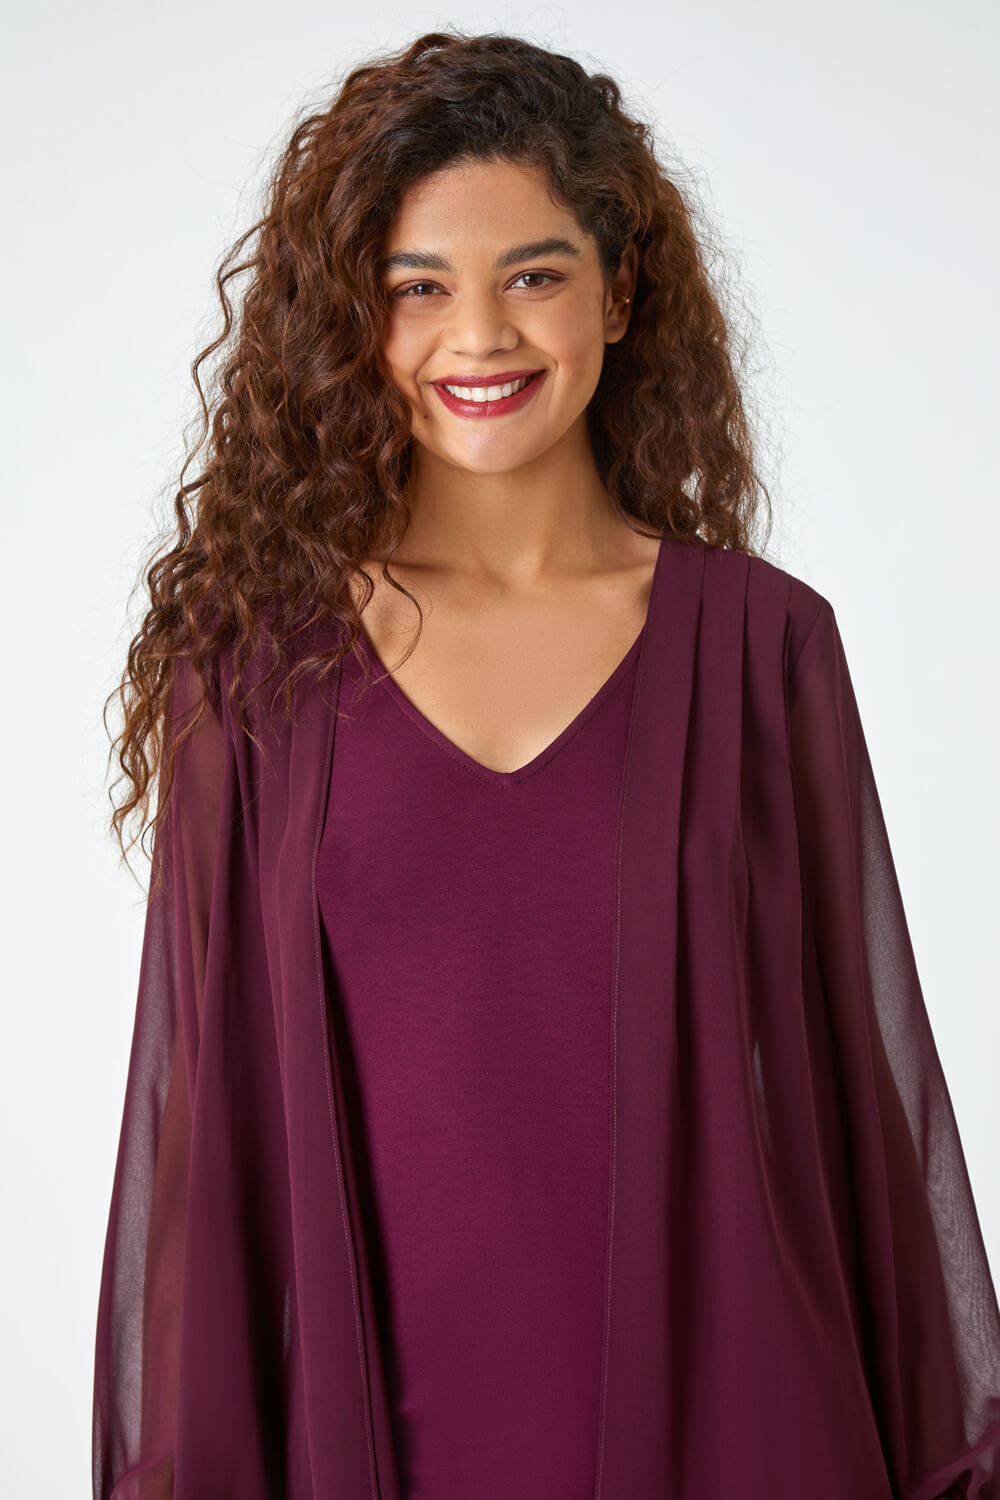 Wine Contrast Chiffon Overlay Stretch Top, Image 4 of 5